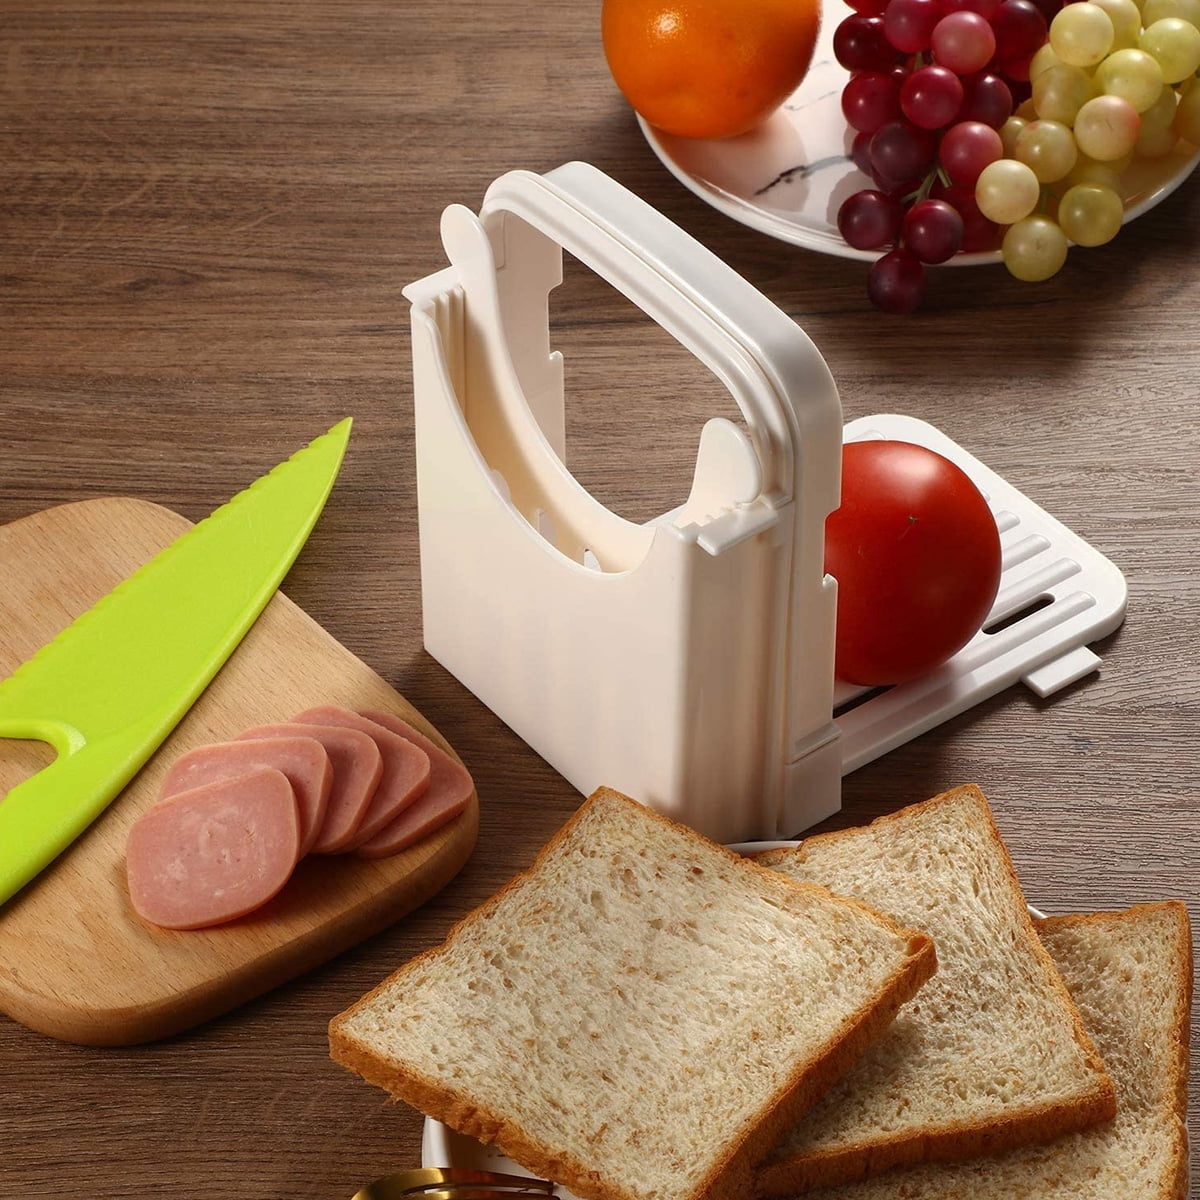 Bread Slicer Foldable Toast Slicer Adjustable Toast Loaf Slicing Machine  with Crumb Catcher Plastic Bread Cutting Guide Tools for Homemade Bread